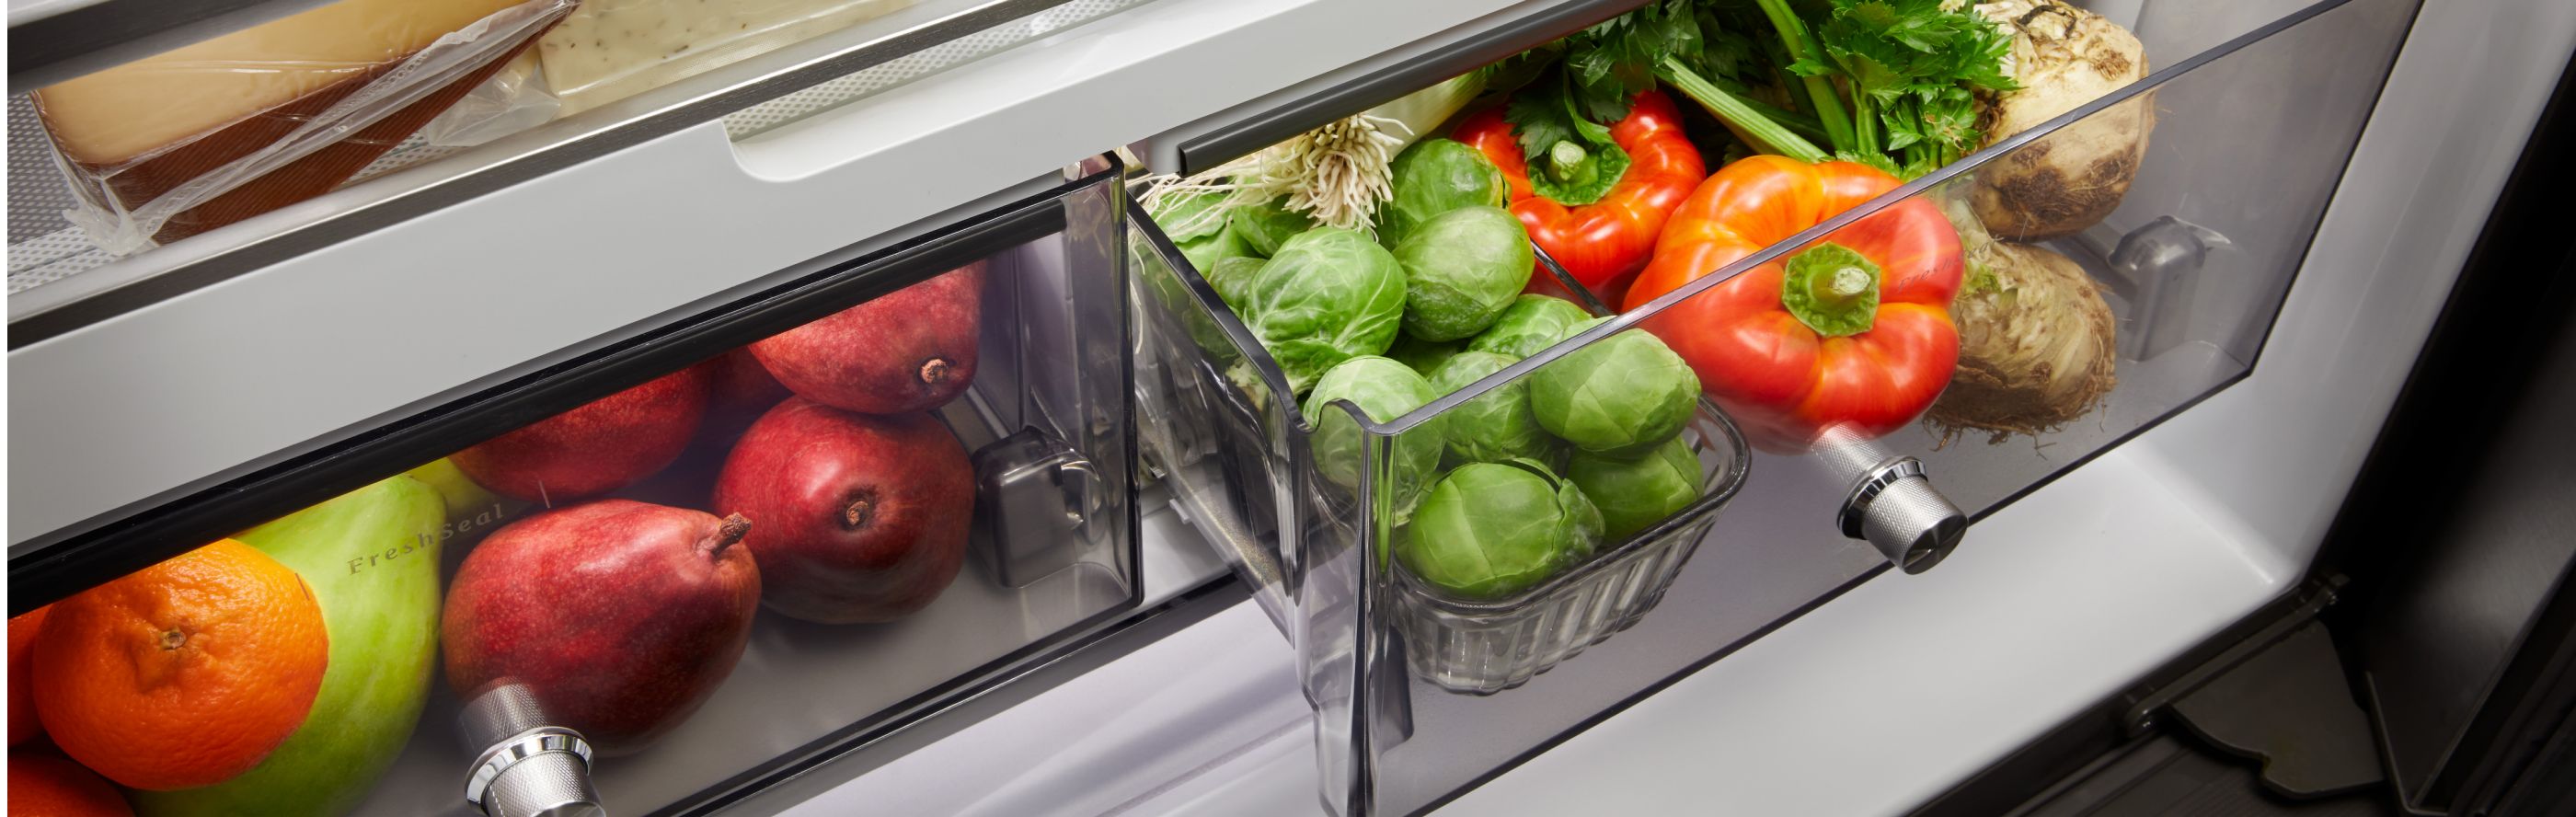 Fresh fruits and vegetables stored in a refrigerator crisper drawer